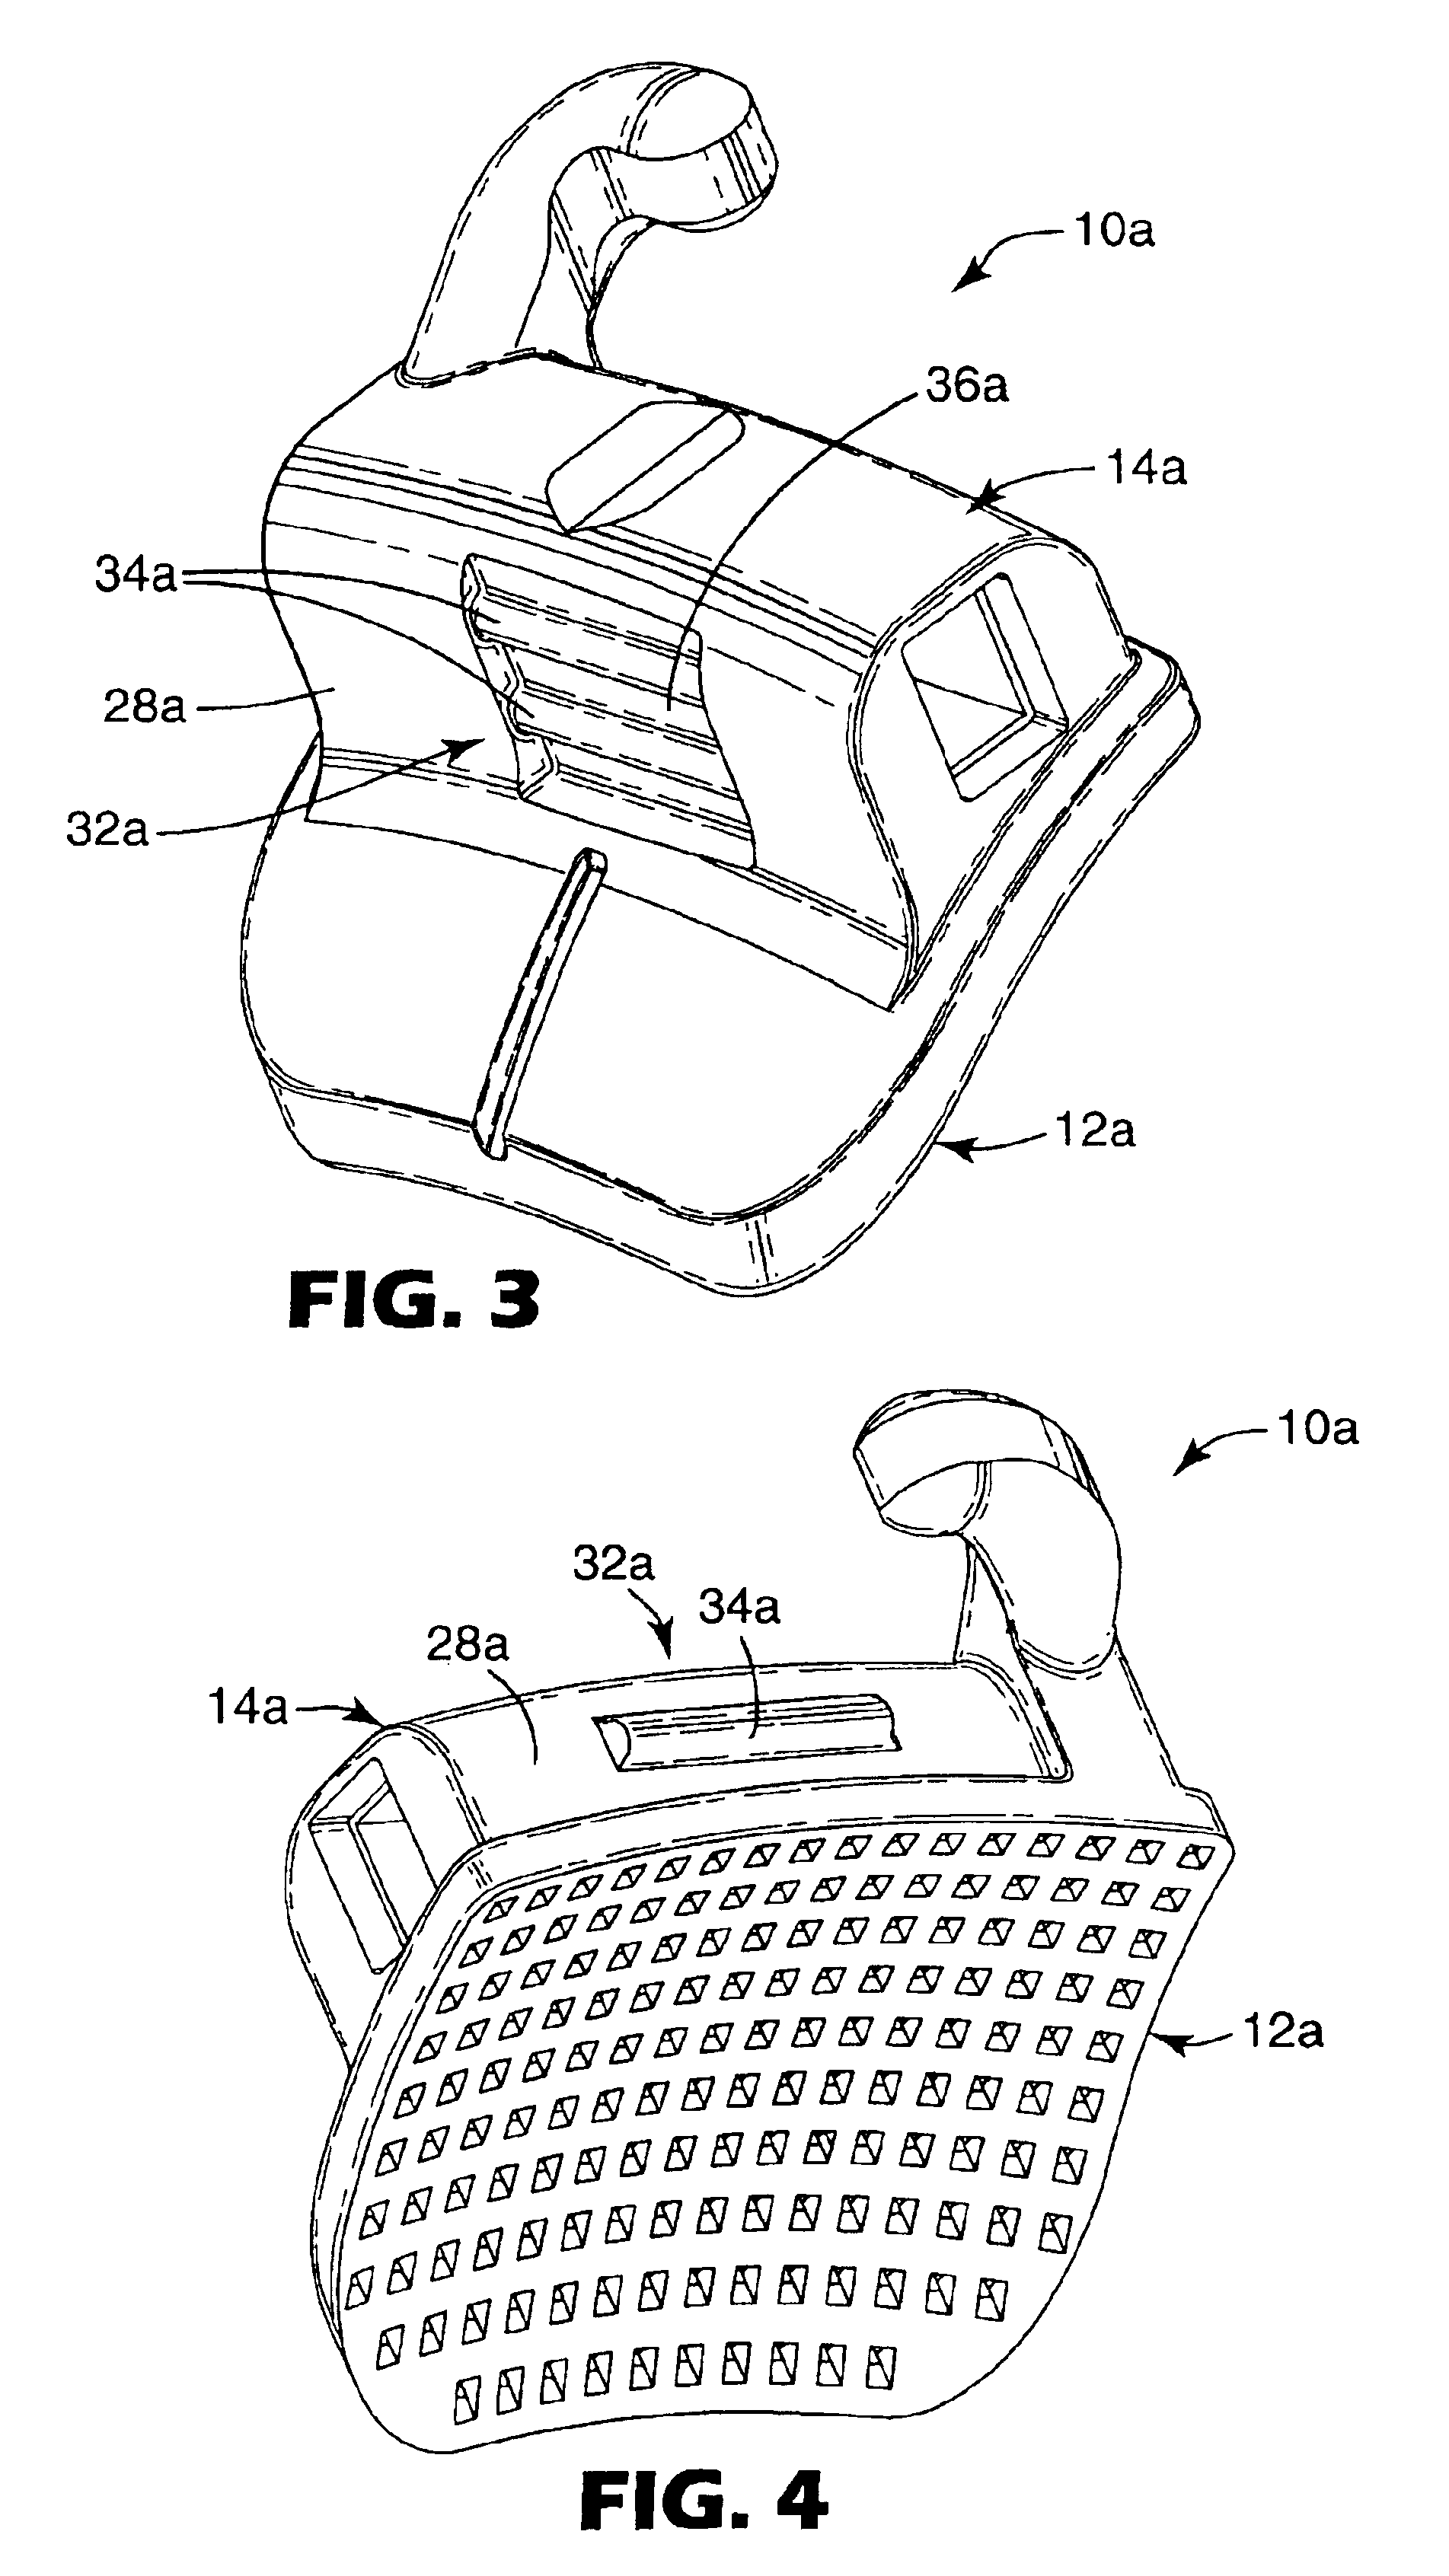 Orthodontic appliance with placement enhancement structure